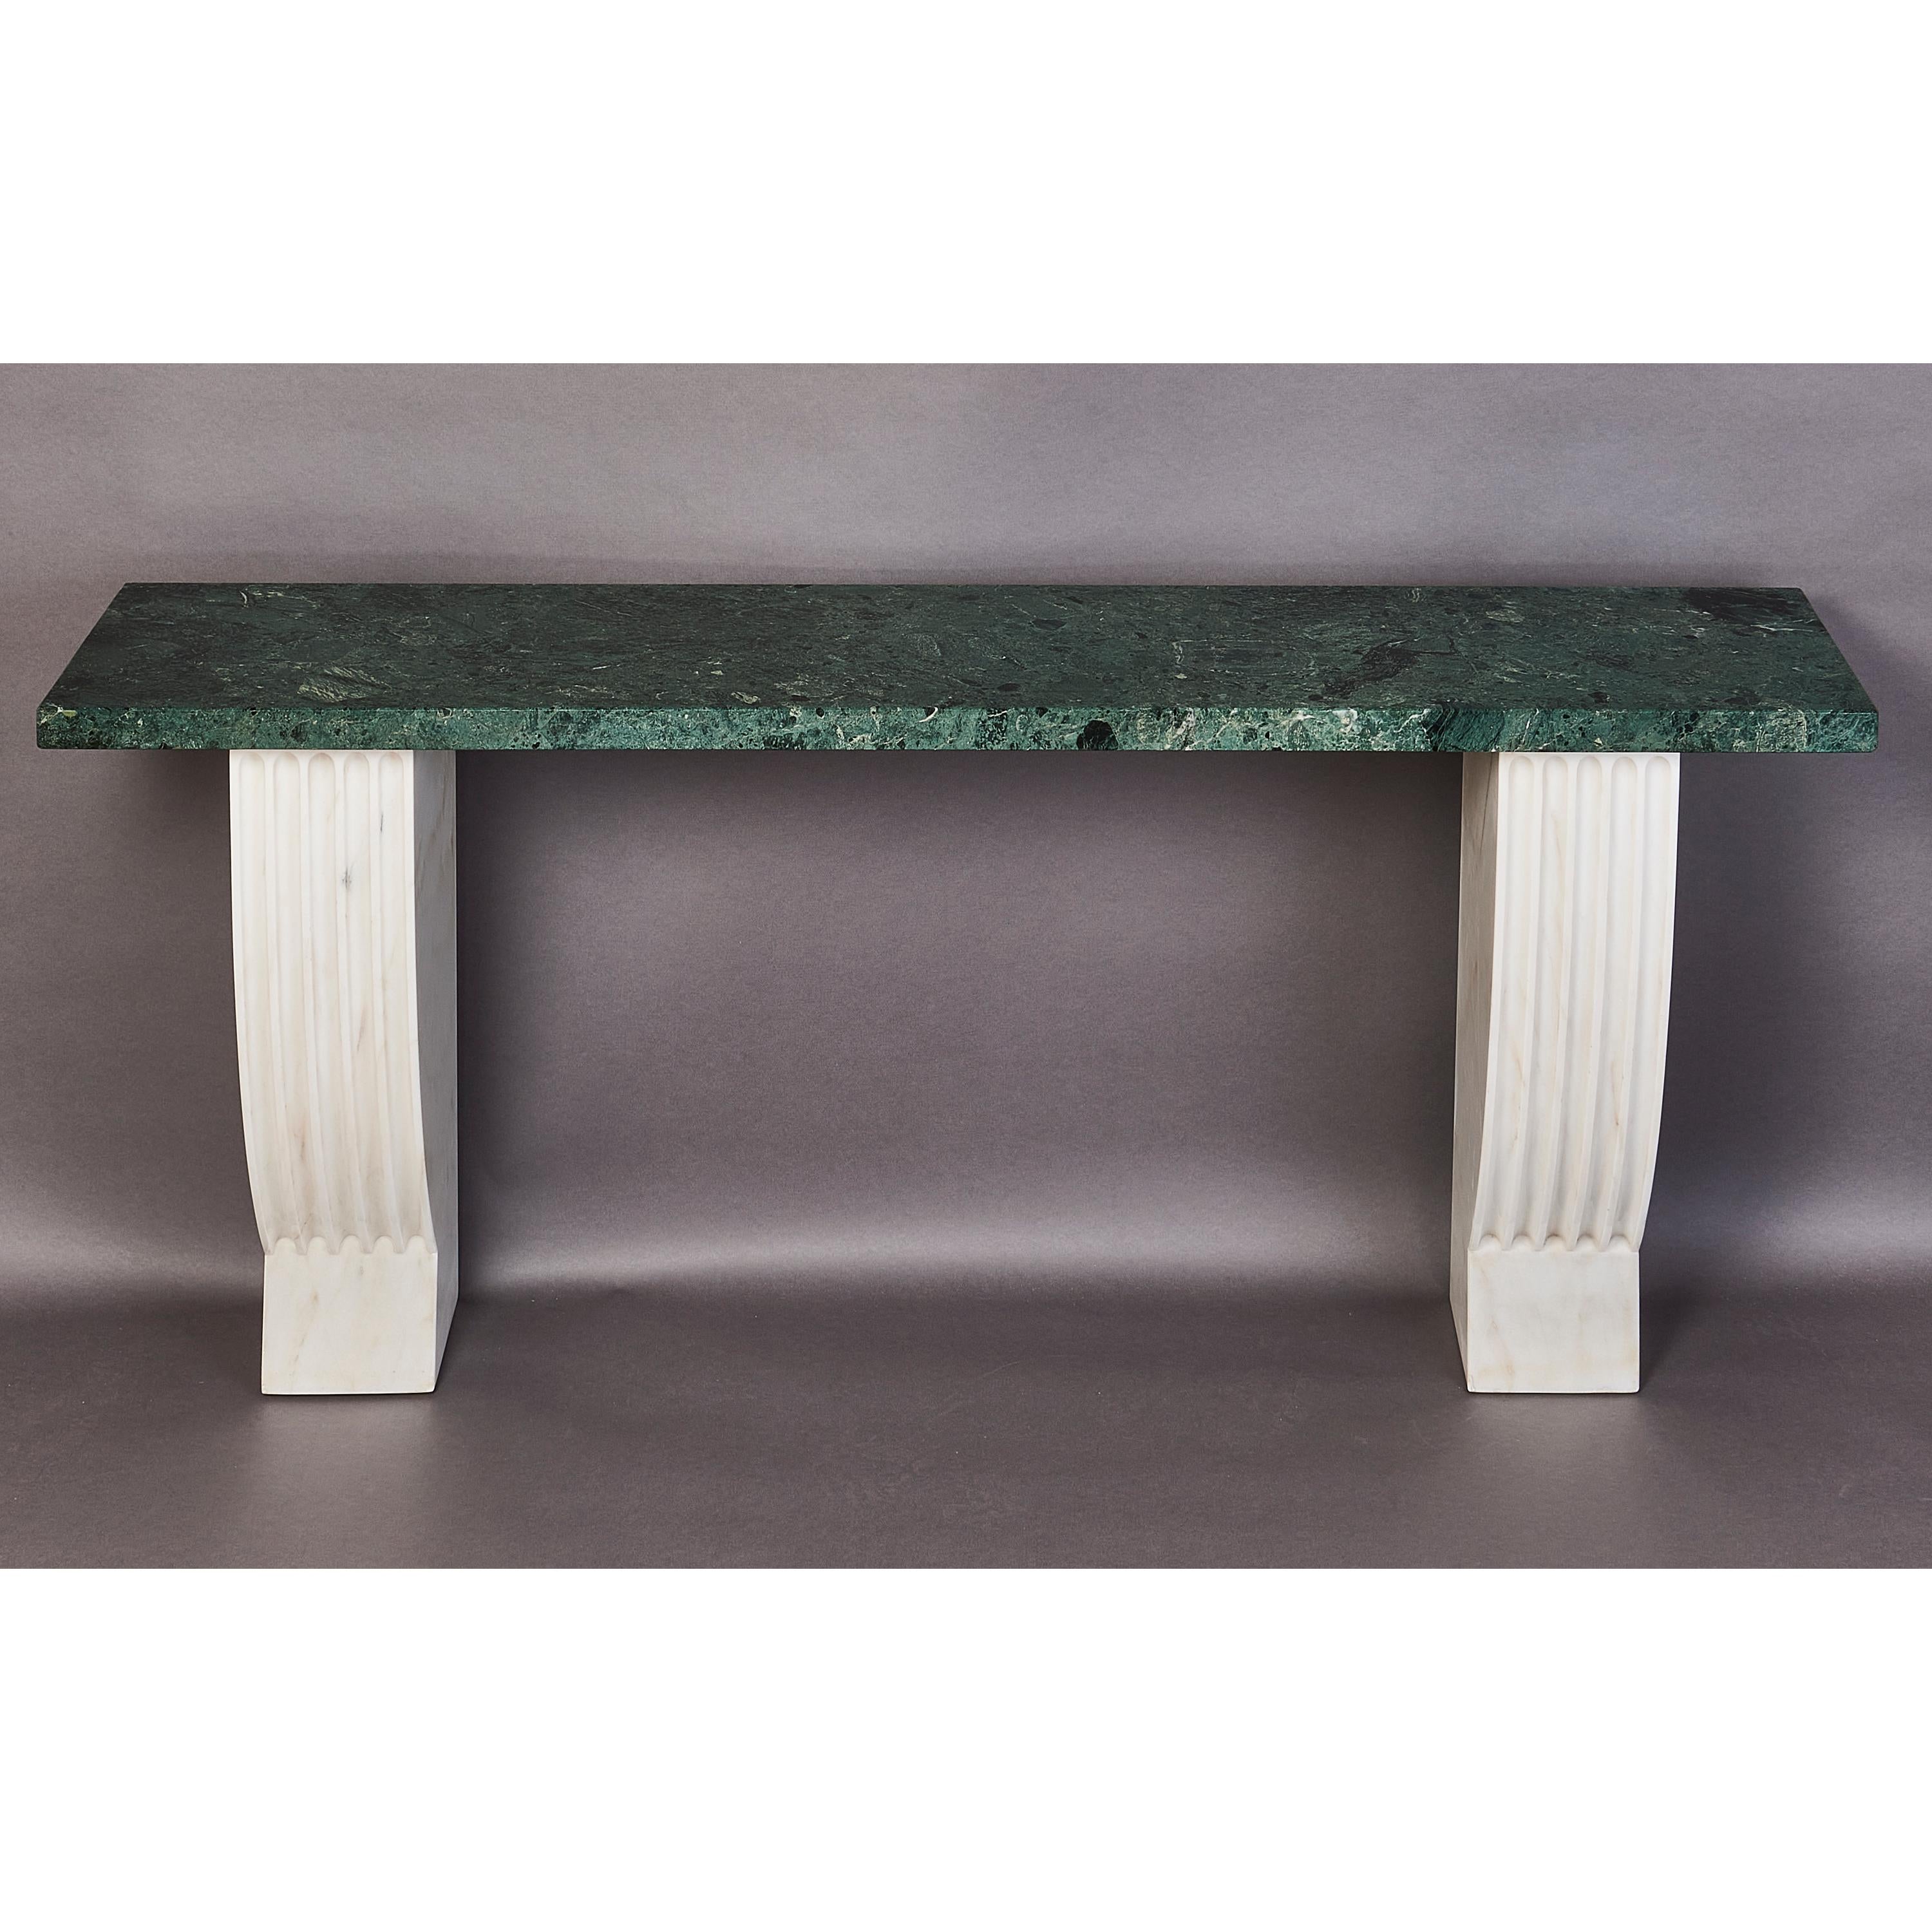 Neoclassical Neo Classical Italian Marble Console, 1930's For Sale